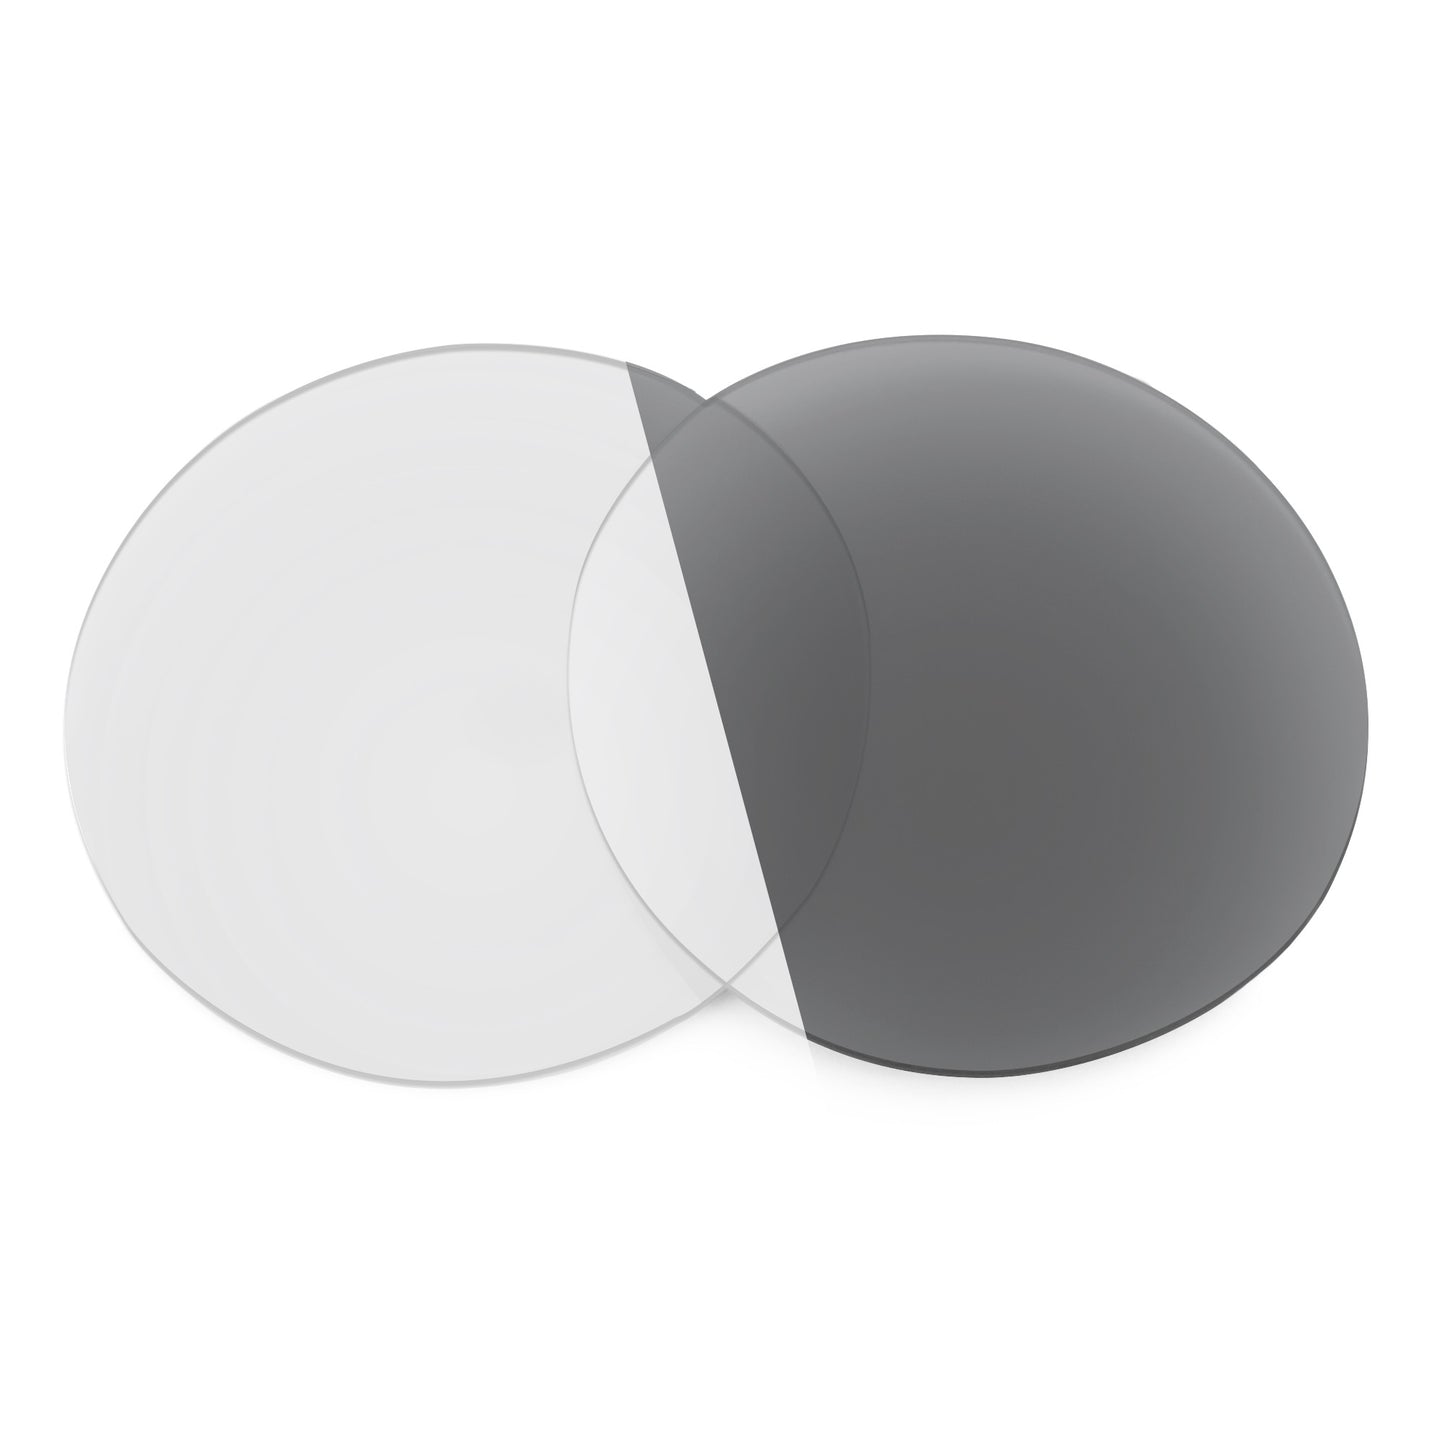 Revant replacement lenses for Ray-Ban Clubround RB4246 51mm Non-Polarized Adapt Gray Photochromic